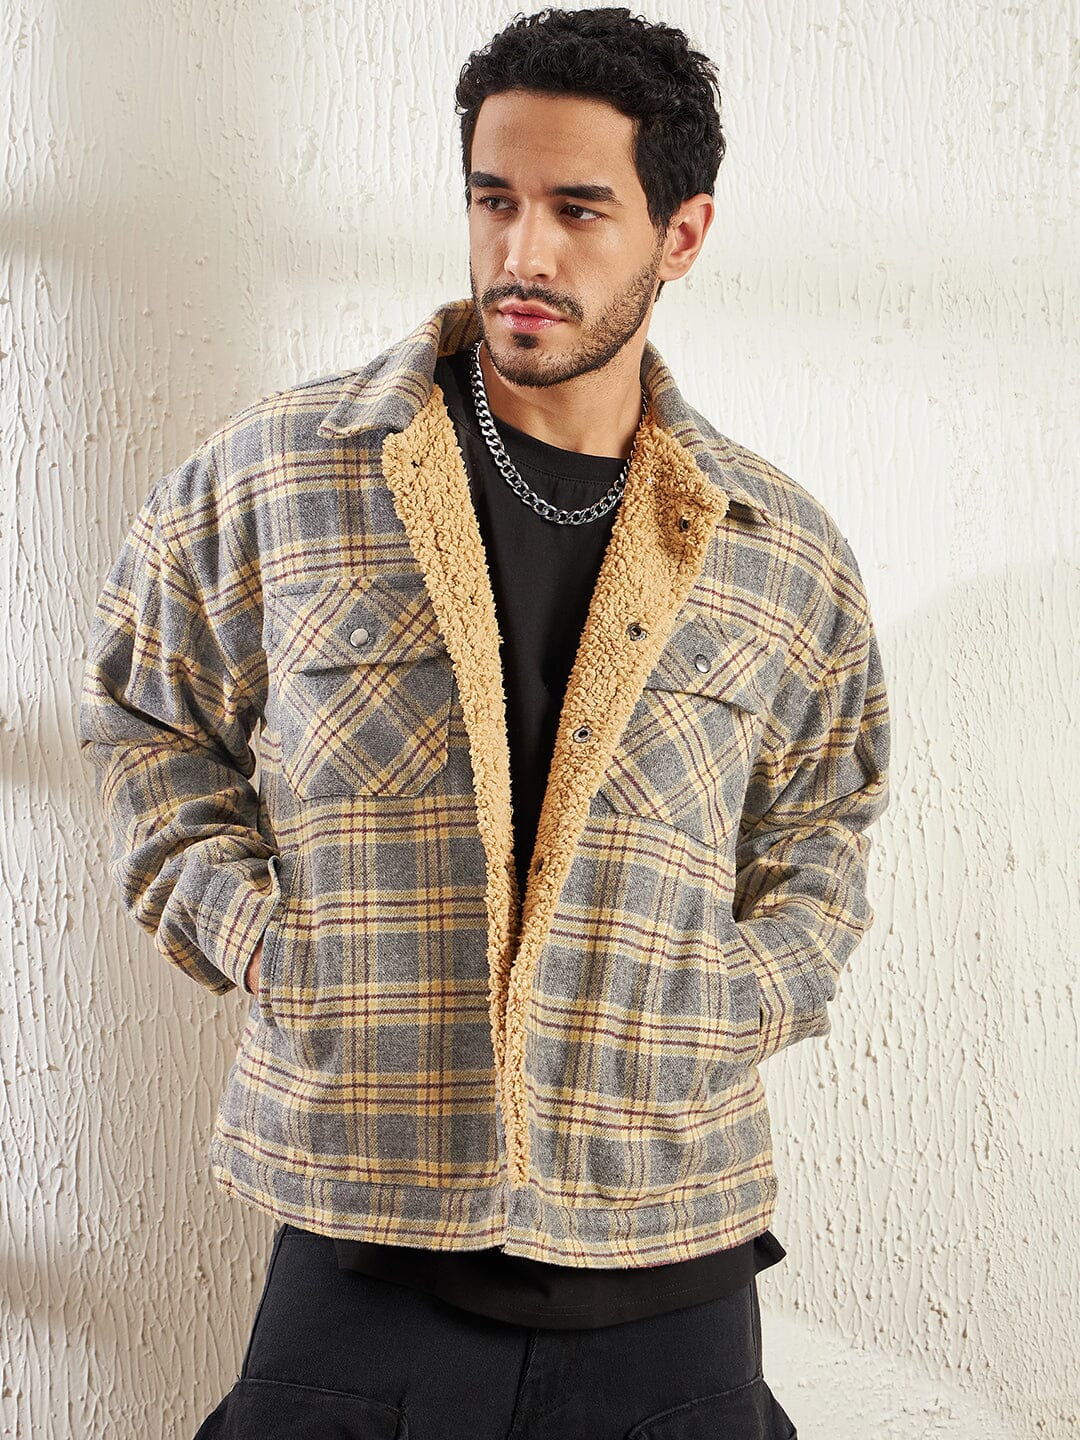 Relaxed Fit Mustard Plaid Sherpa Jacket – Buzz Shop